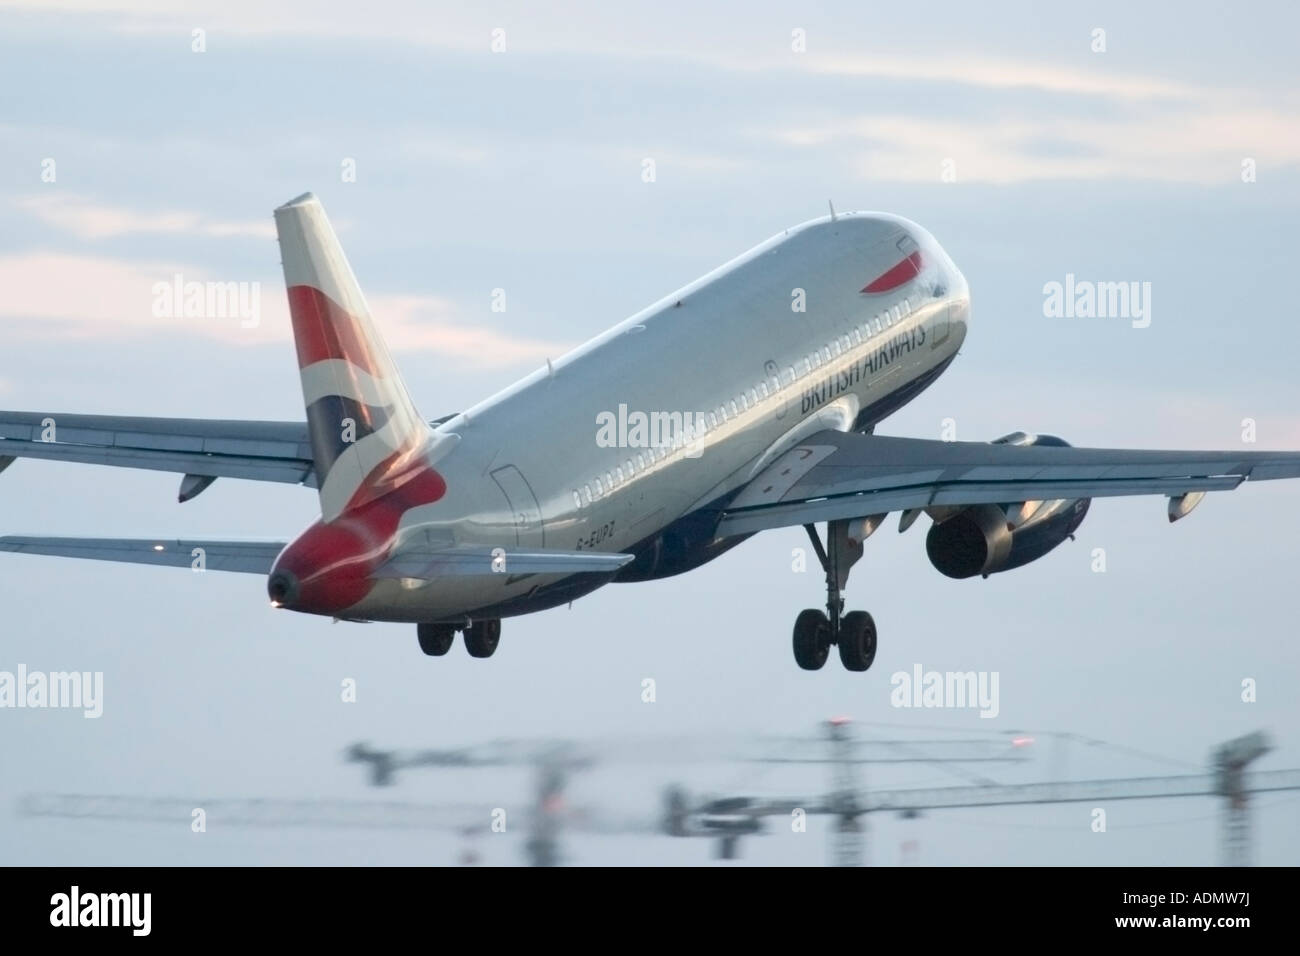 British Airways Airbus just after take off from London Heathrow Airport England UK Stock Photo